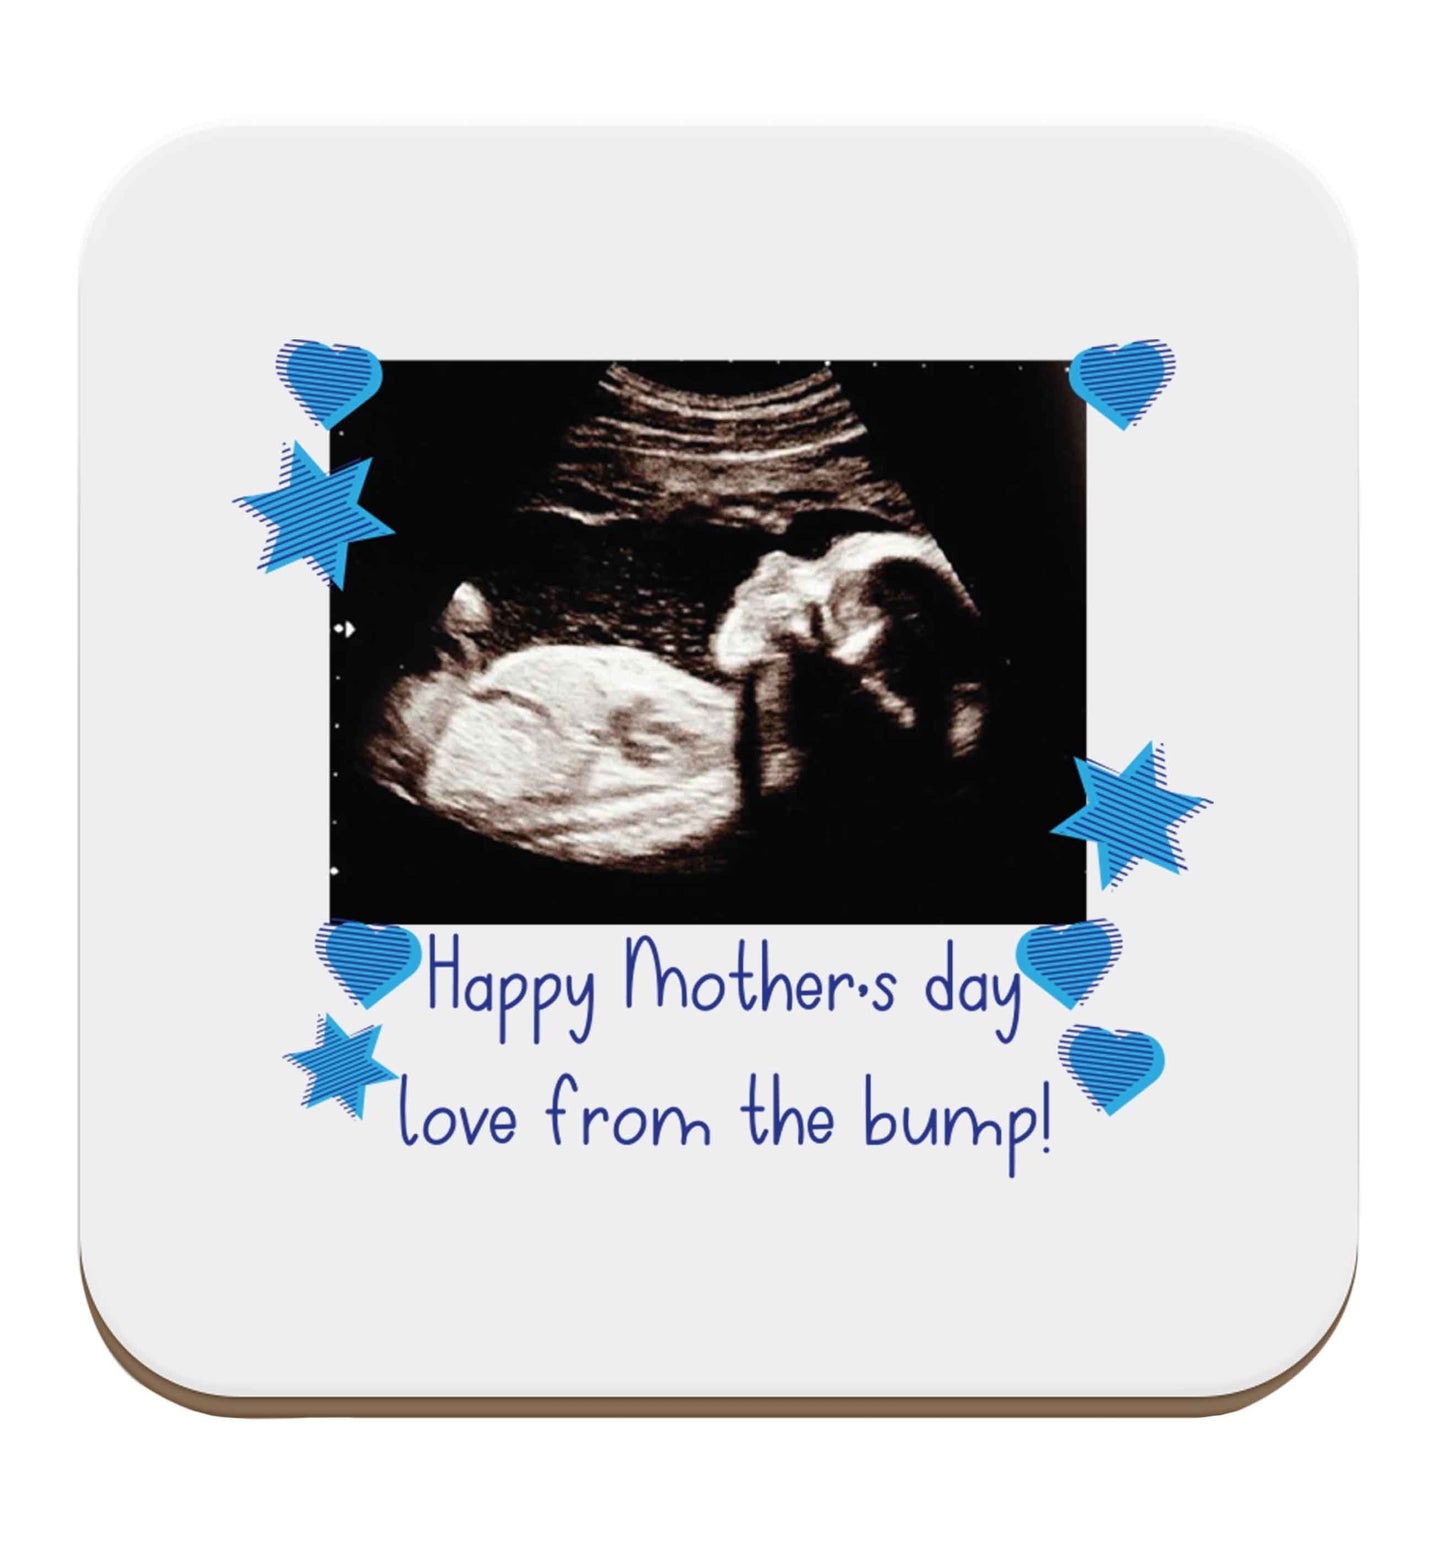 Happy Mother's day love from the bump - blue set of four coasters